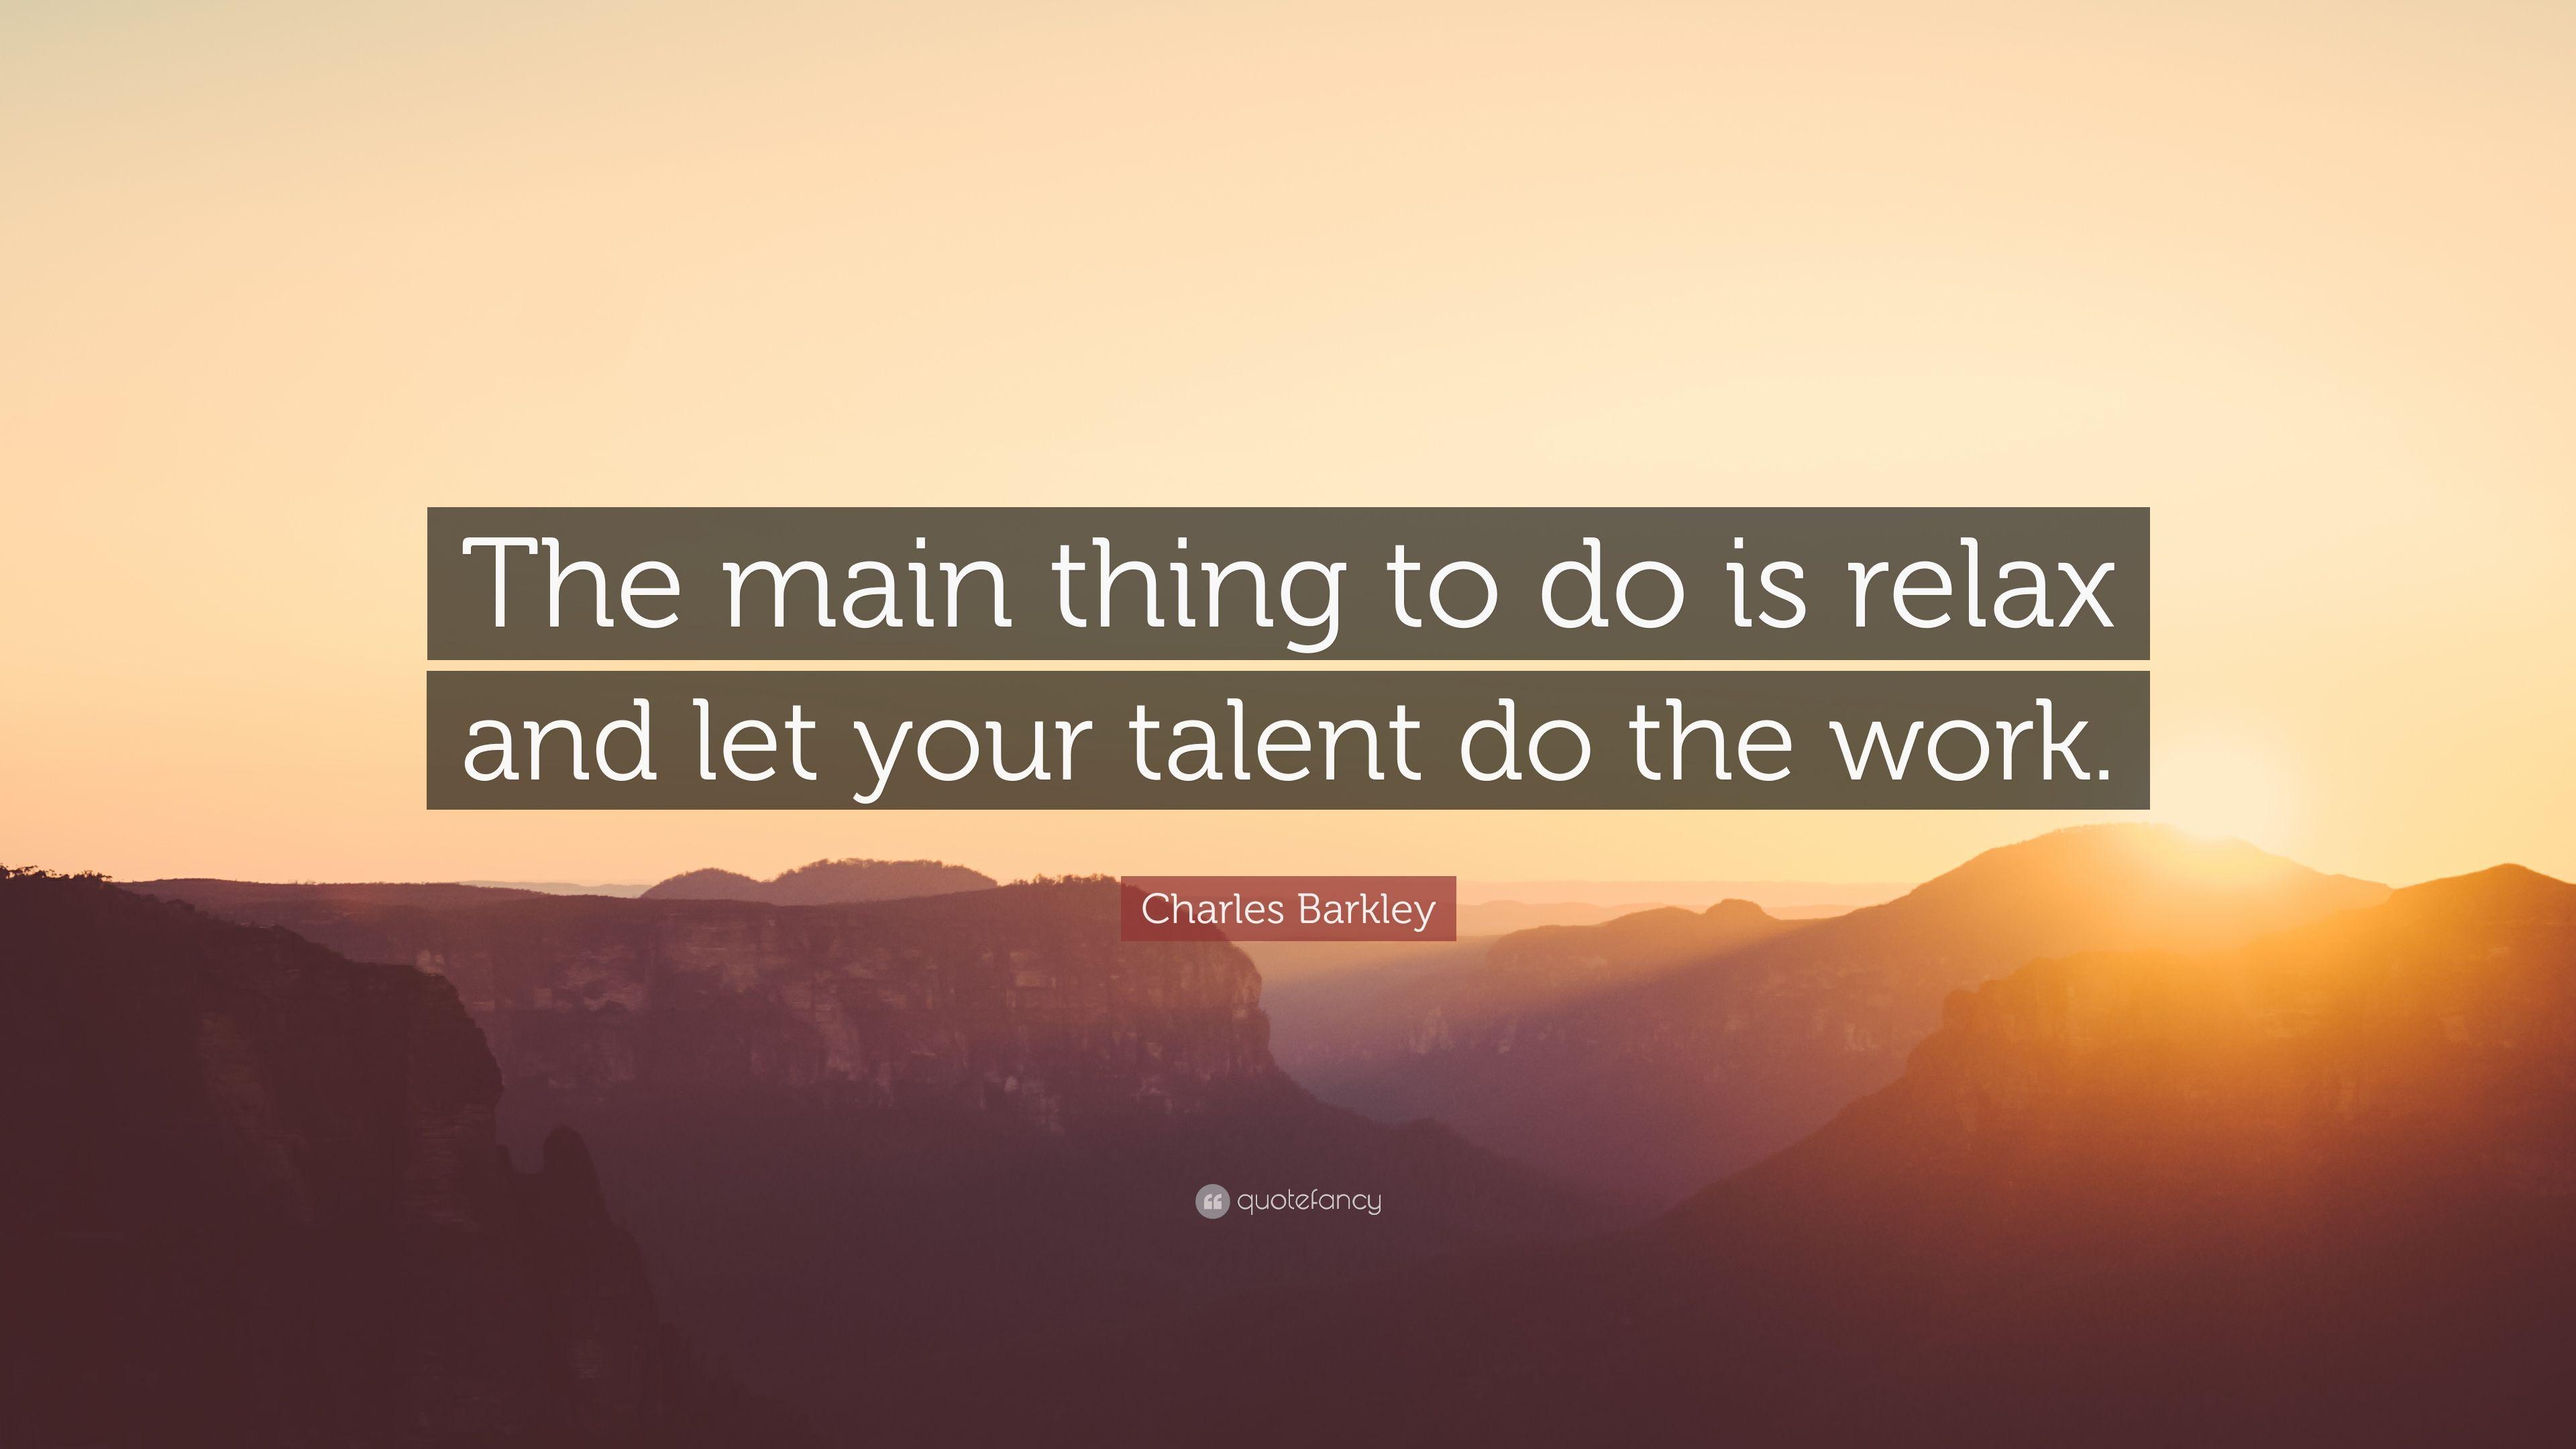 Charles Barkley Quote: “The main thing to do is relax and let your